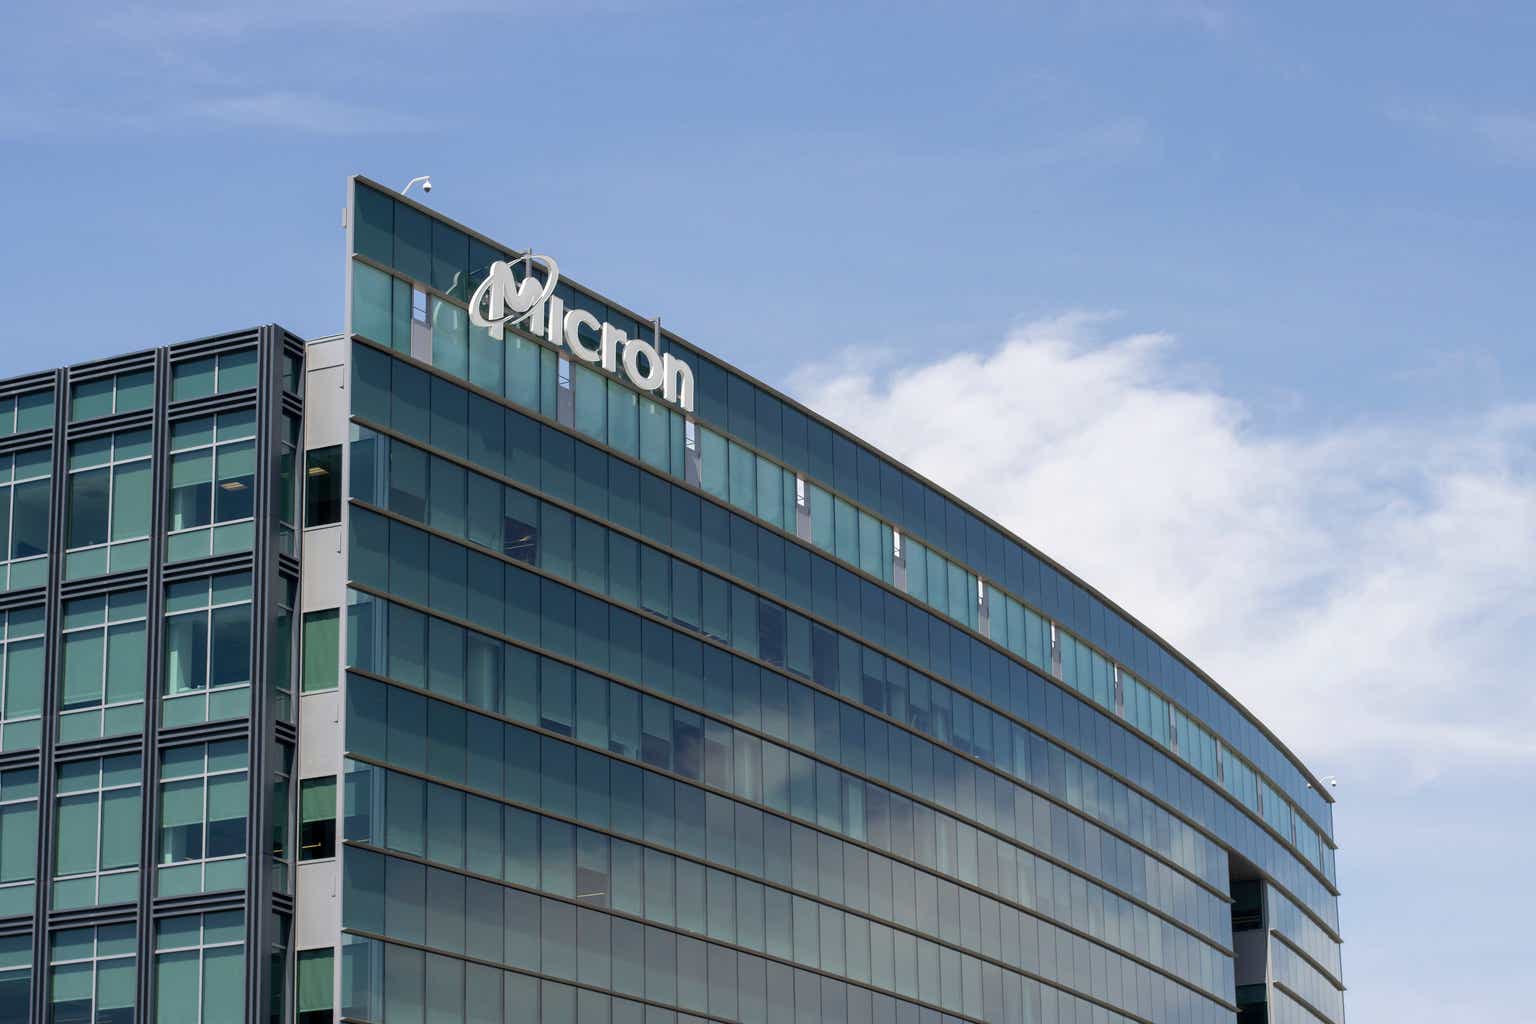 Micron: Memory And Storage Growth Driven By AI And HBM3; Price Bottomed Out (NASDAQ:MU)